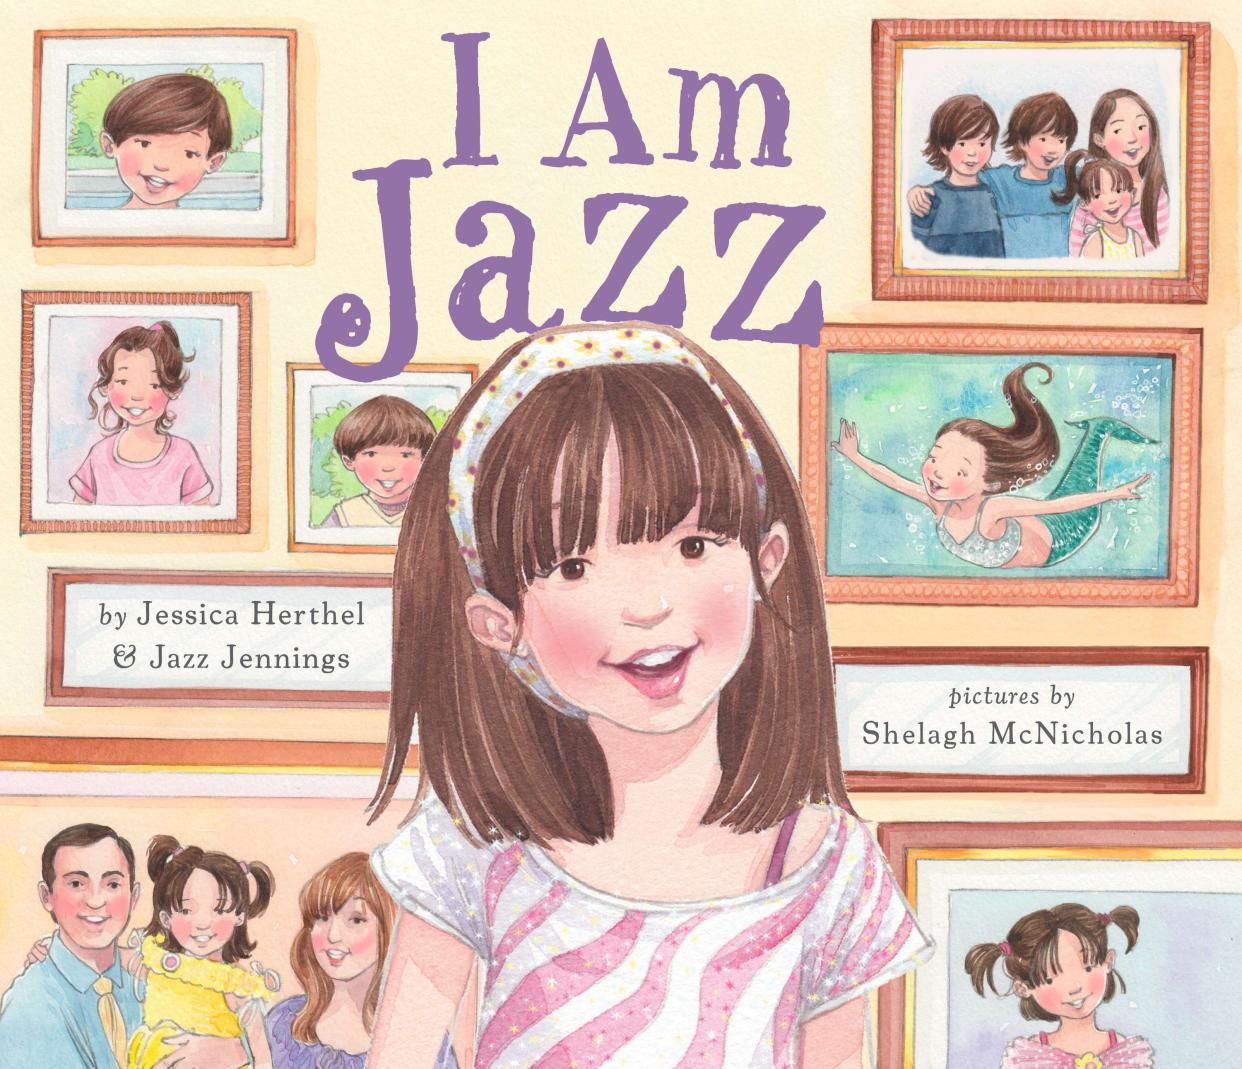 "I Am Jazz," a book chronicling the experience of a trans child, co-written by Jazz Jennings and Jessica Herthel, continues to be banned by school districts. But its co-author says its message is positive for children of all experiences. (Credit: Penguin Random House)